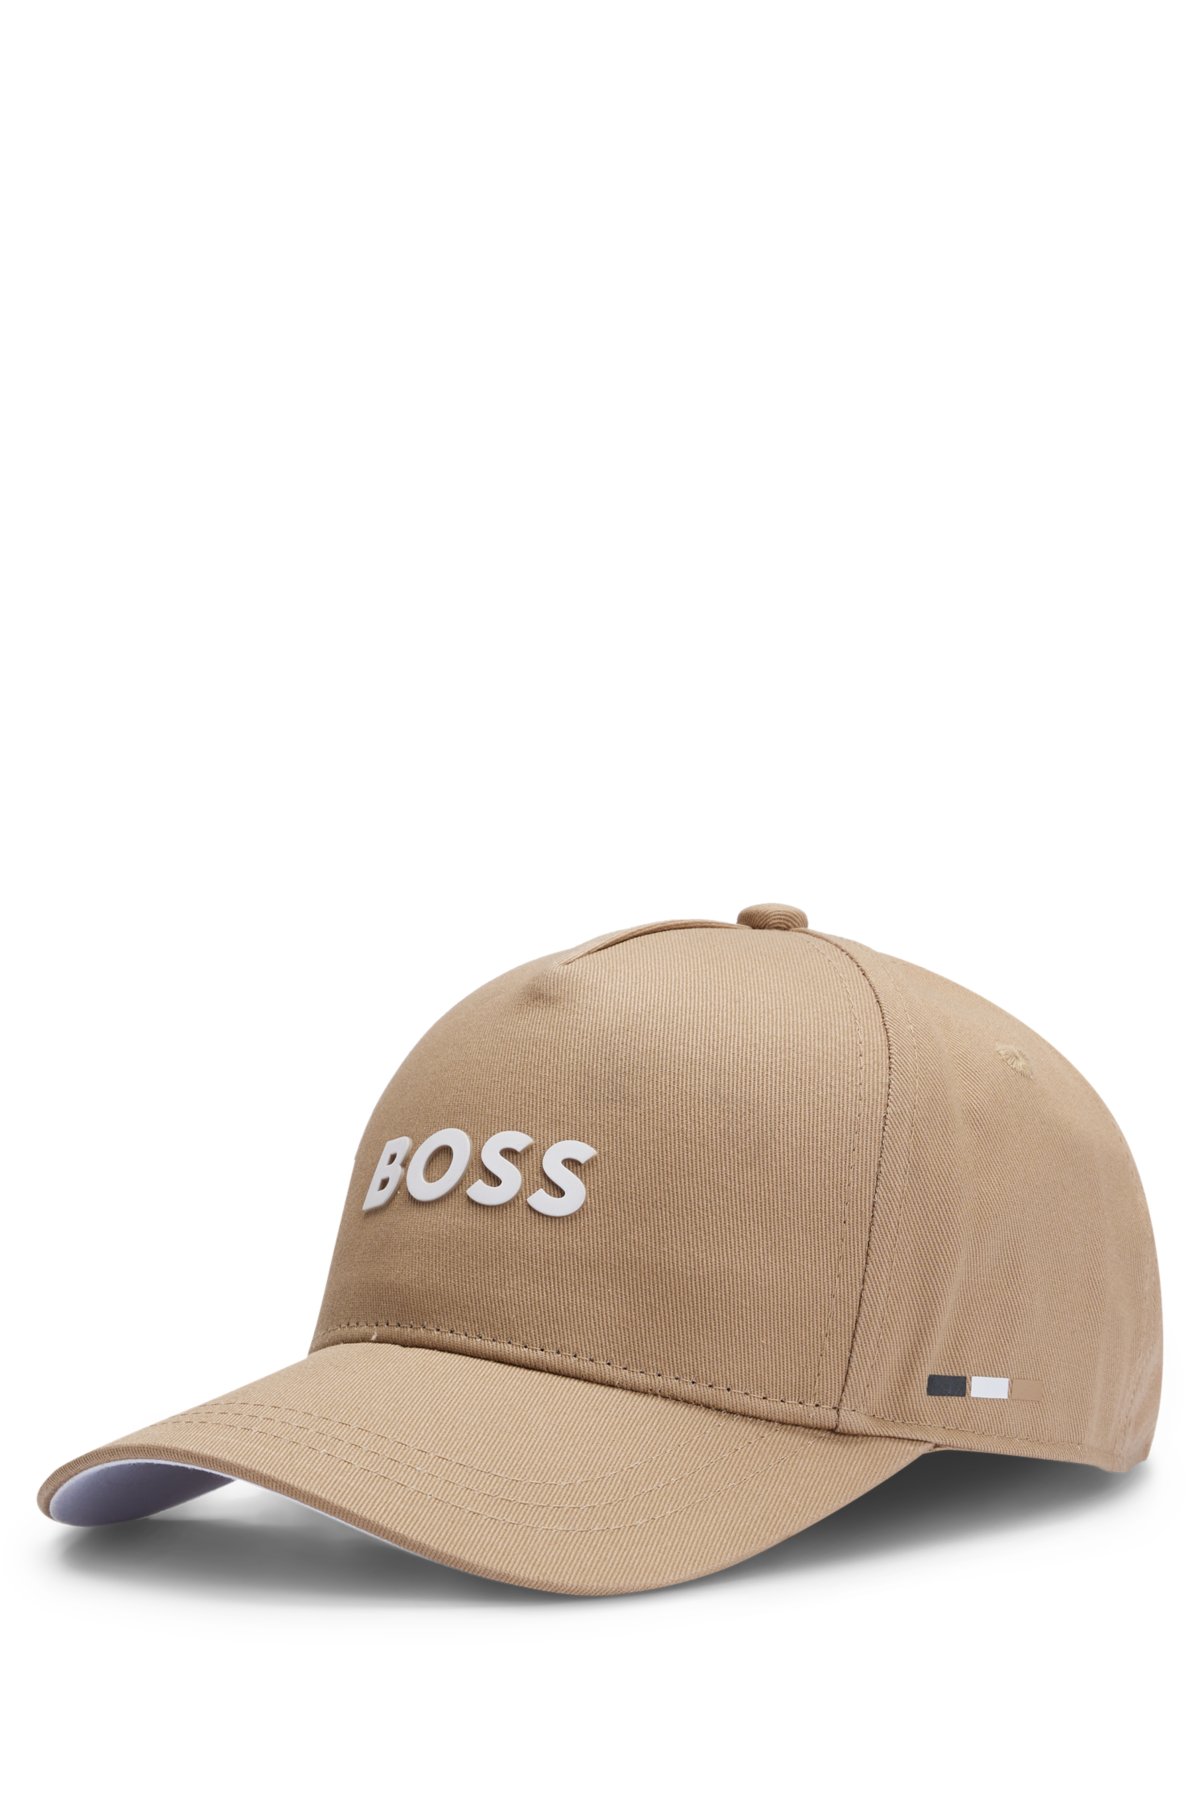 Kids' cap in cotton twill with logo details, Brown